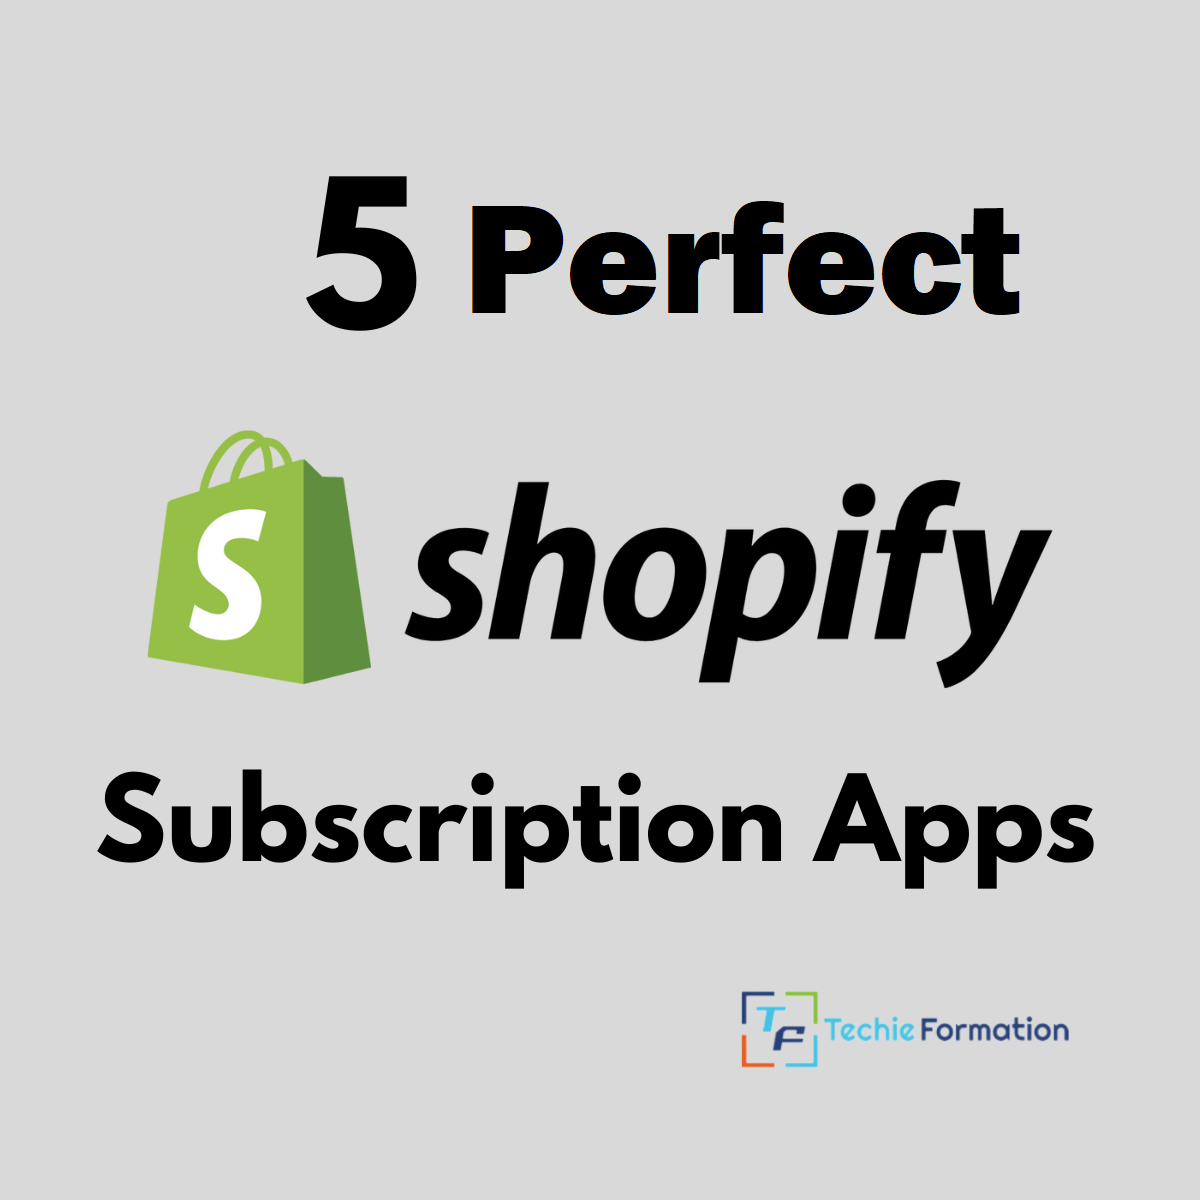 5 Perfect Shopify Subscription Apps in 2023 for Shopify